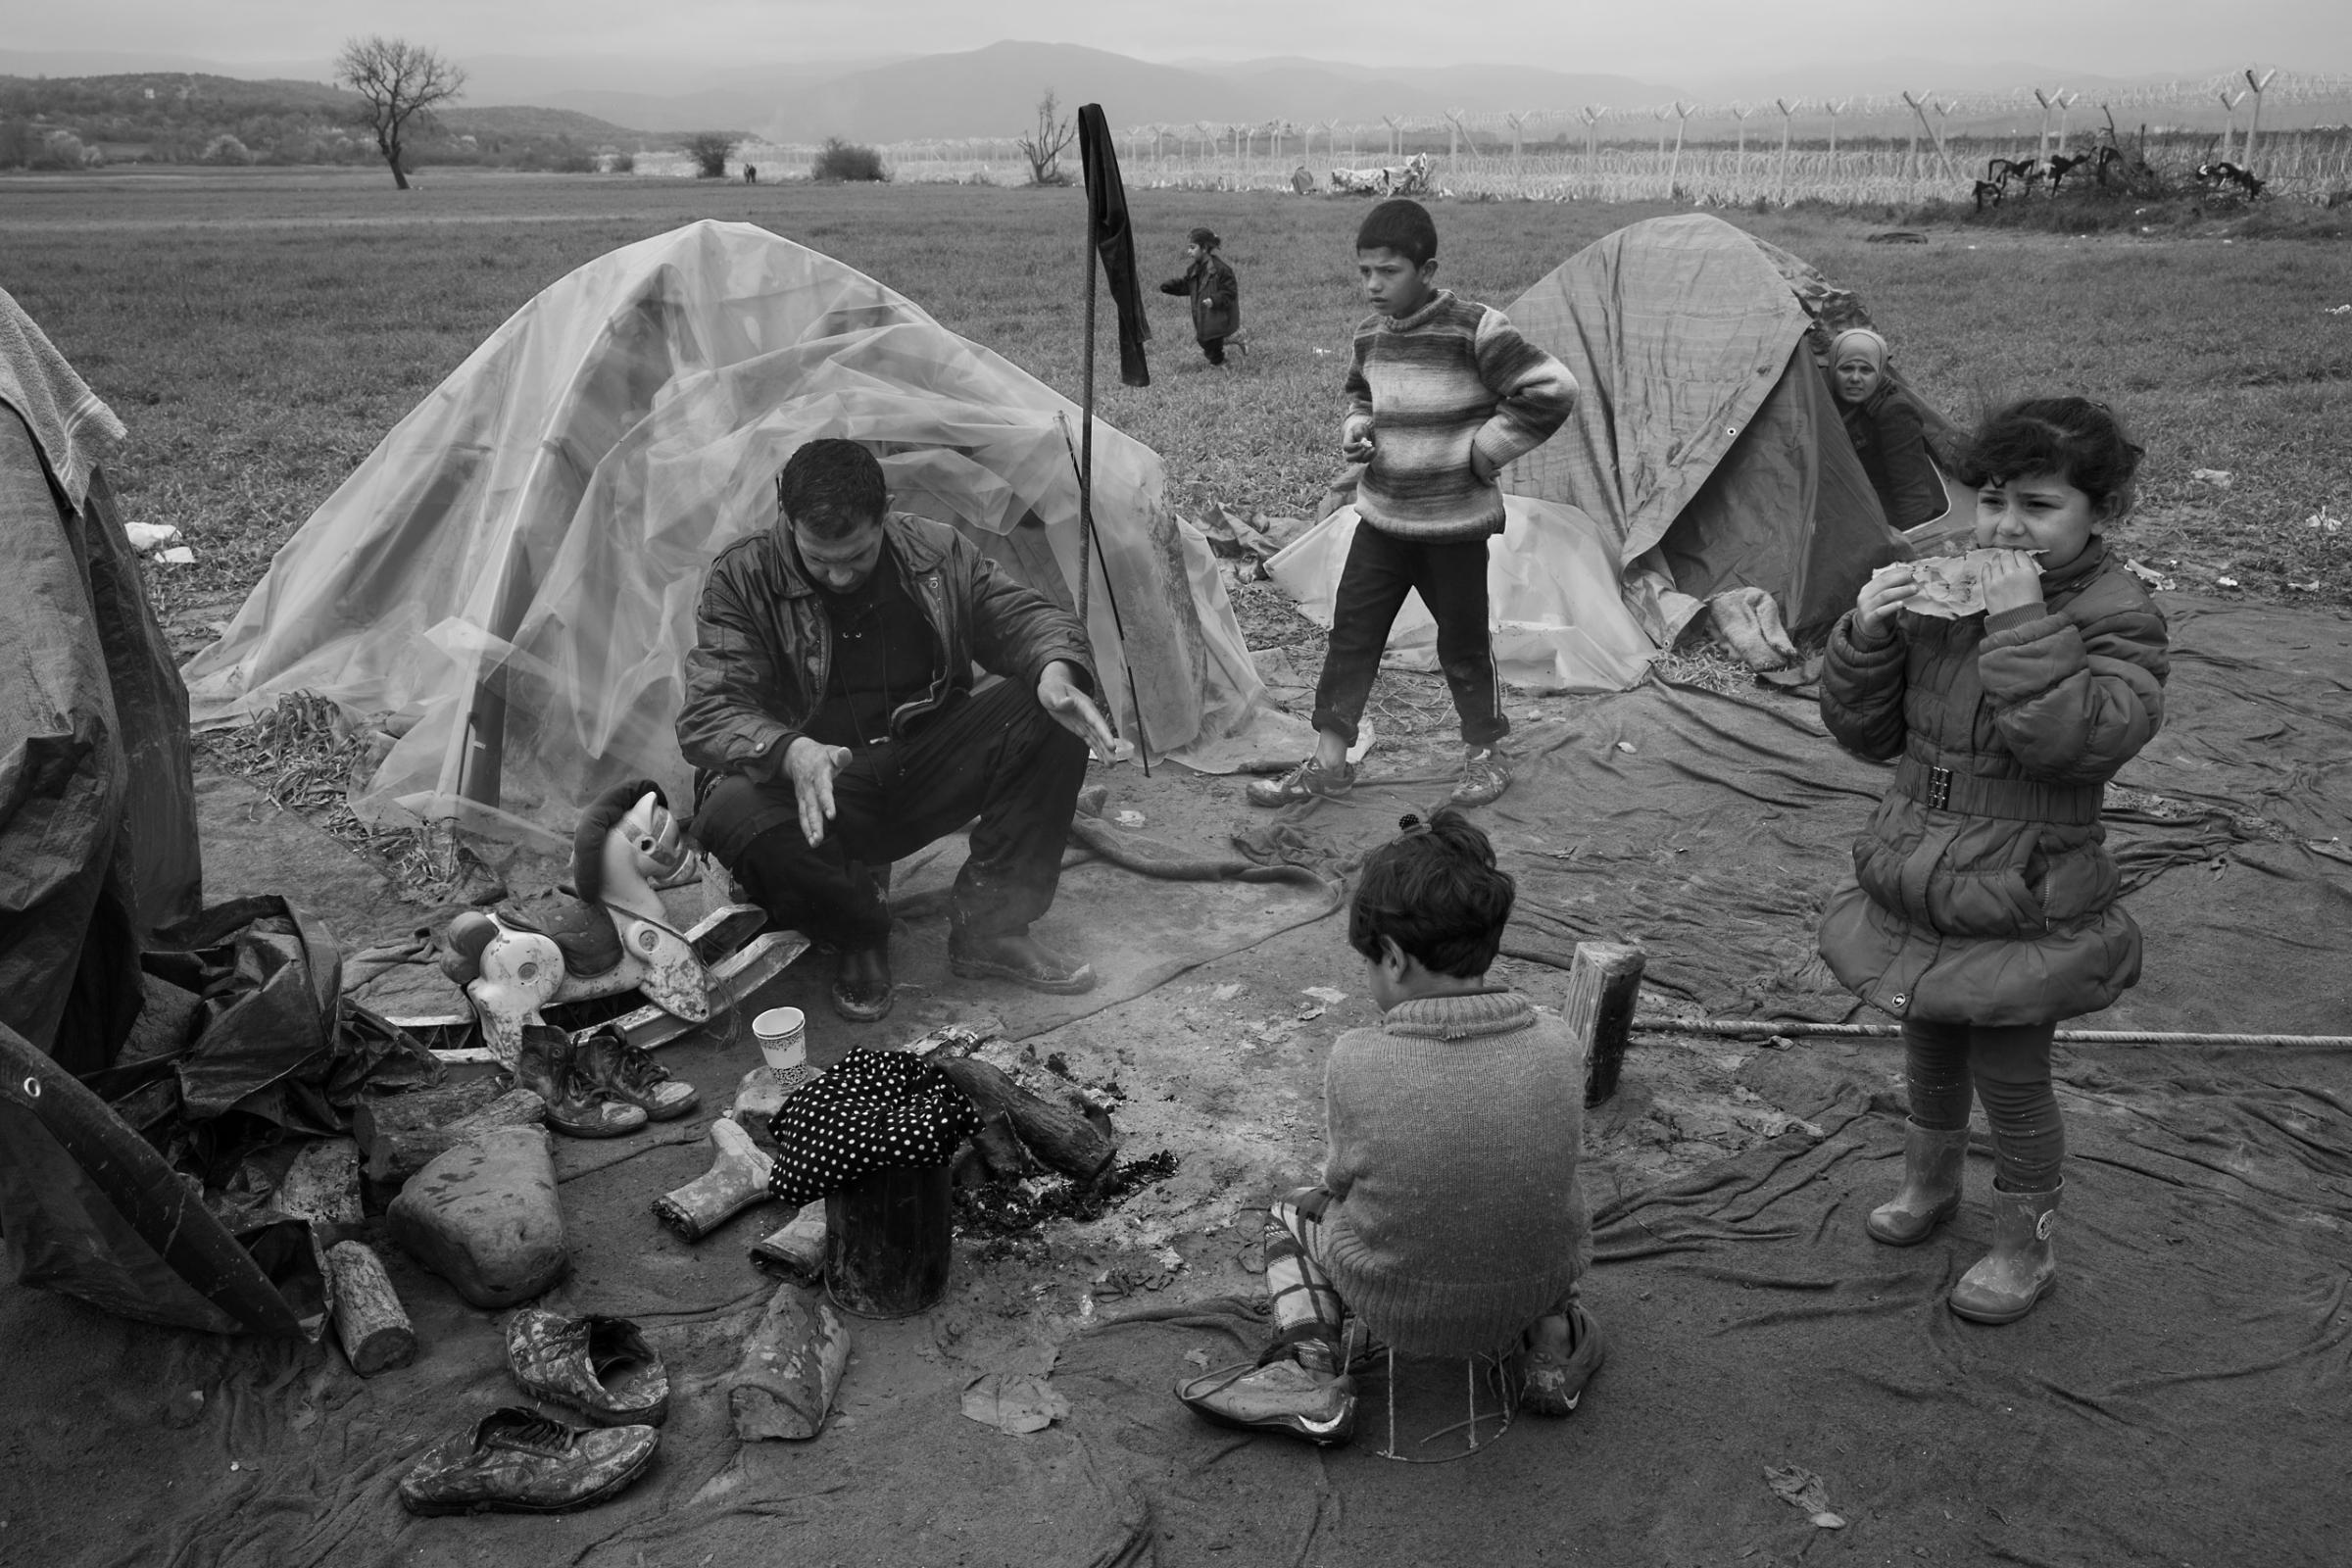 Thousands of refugees are stranded in a "no-mans land" camp at border of Greece and Macedonia near the town of Idomeni. Since it was created around railway tracks last summer, conditions have grown increasingly unlivable, with shortages of food, toilets and health care, as well as beds. The camp’s inhabitants cook their meals over bonfires of plastic and other trash, March 17, 2016.